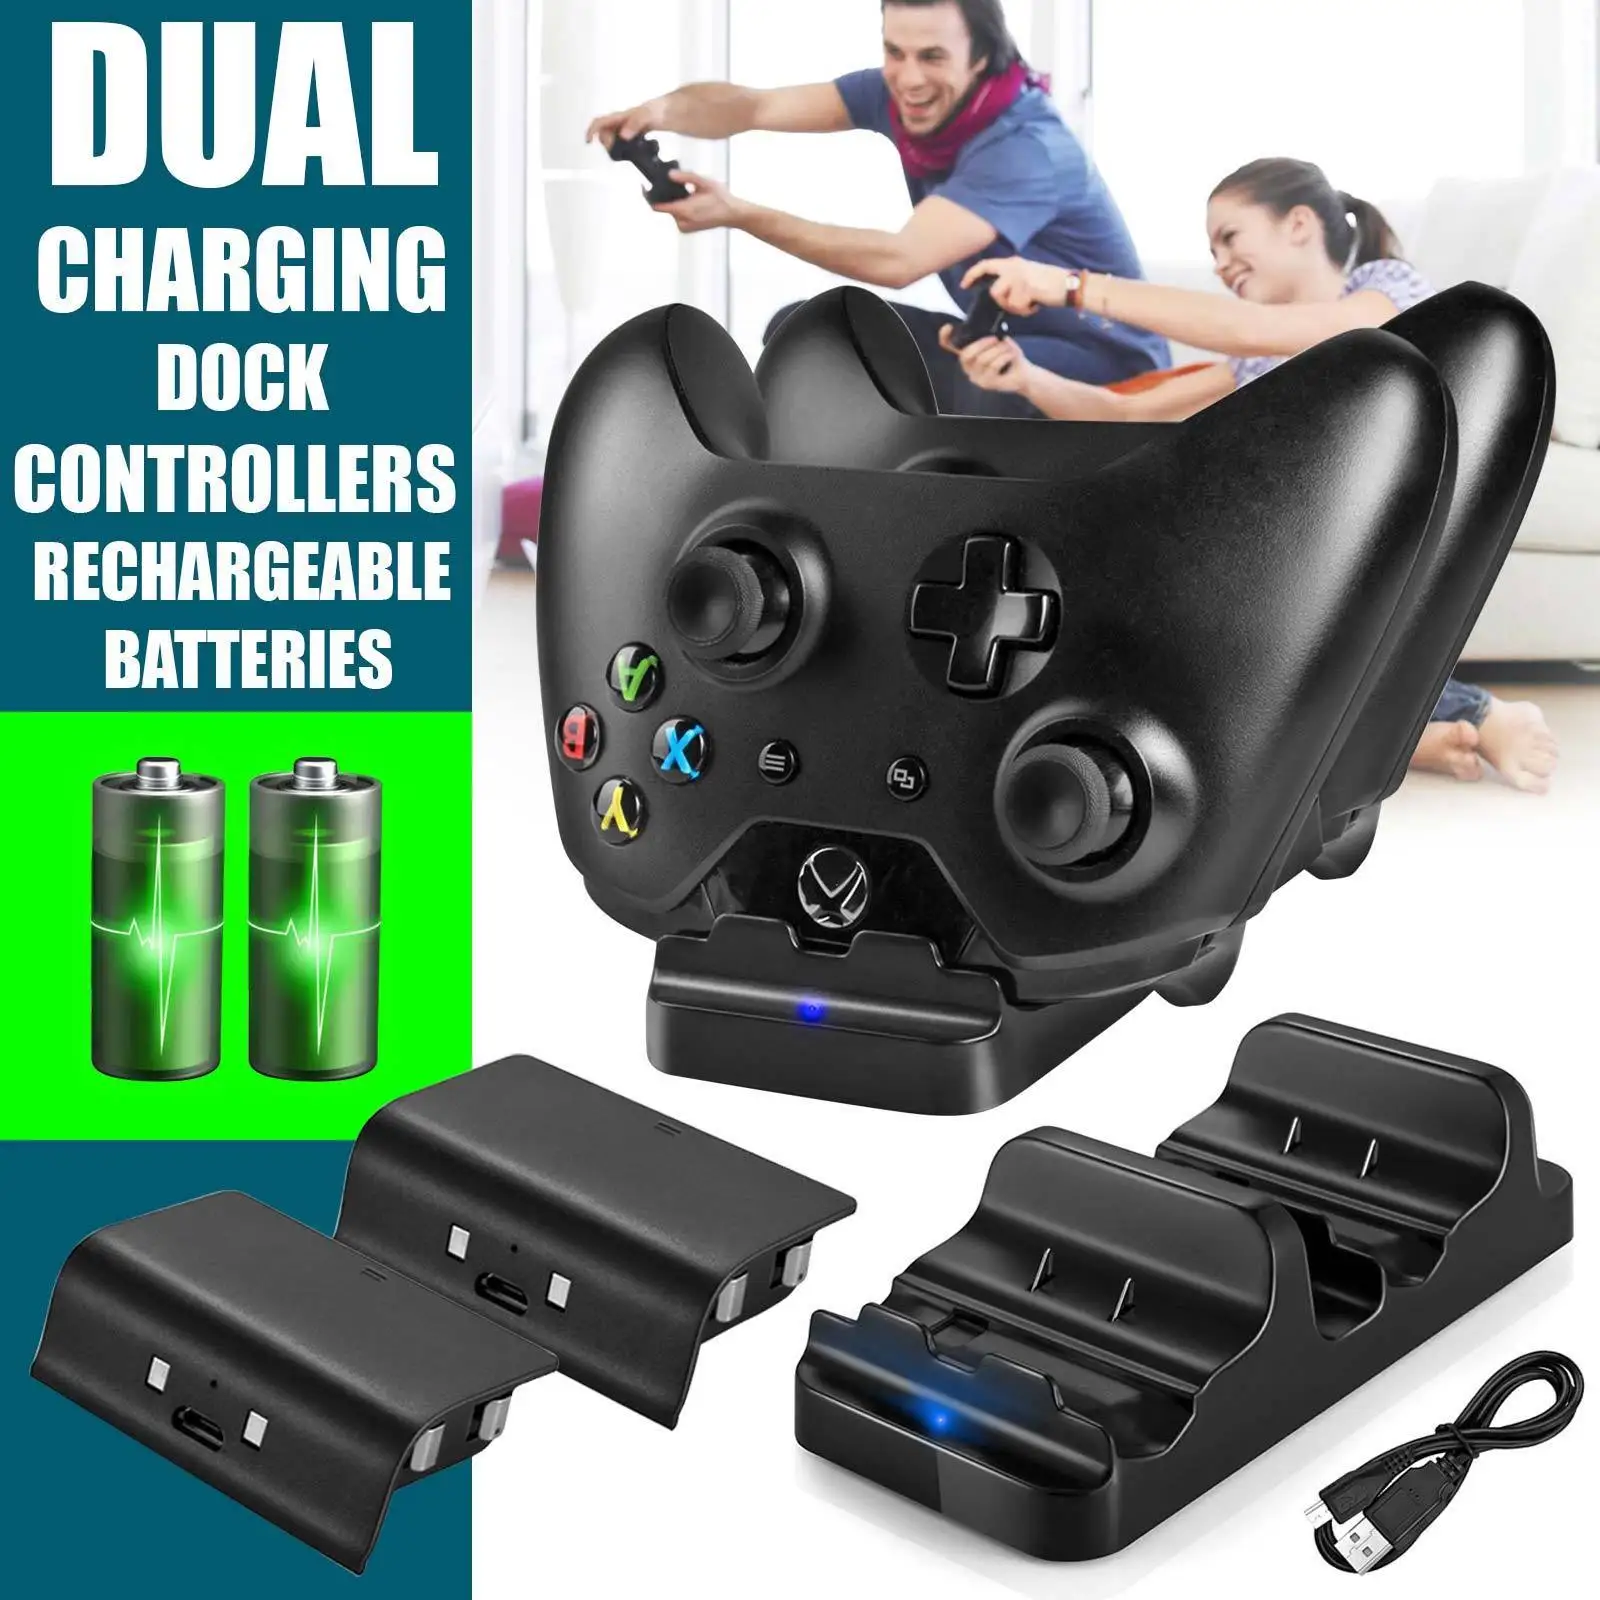 

Game Charger Dual Charging Dock Station Controller Chargers With Rechargeable Battery Pack USB Charging Cable For Xbox One